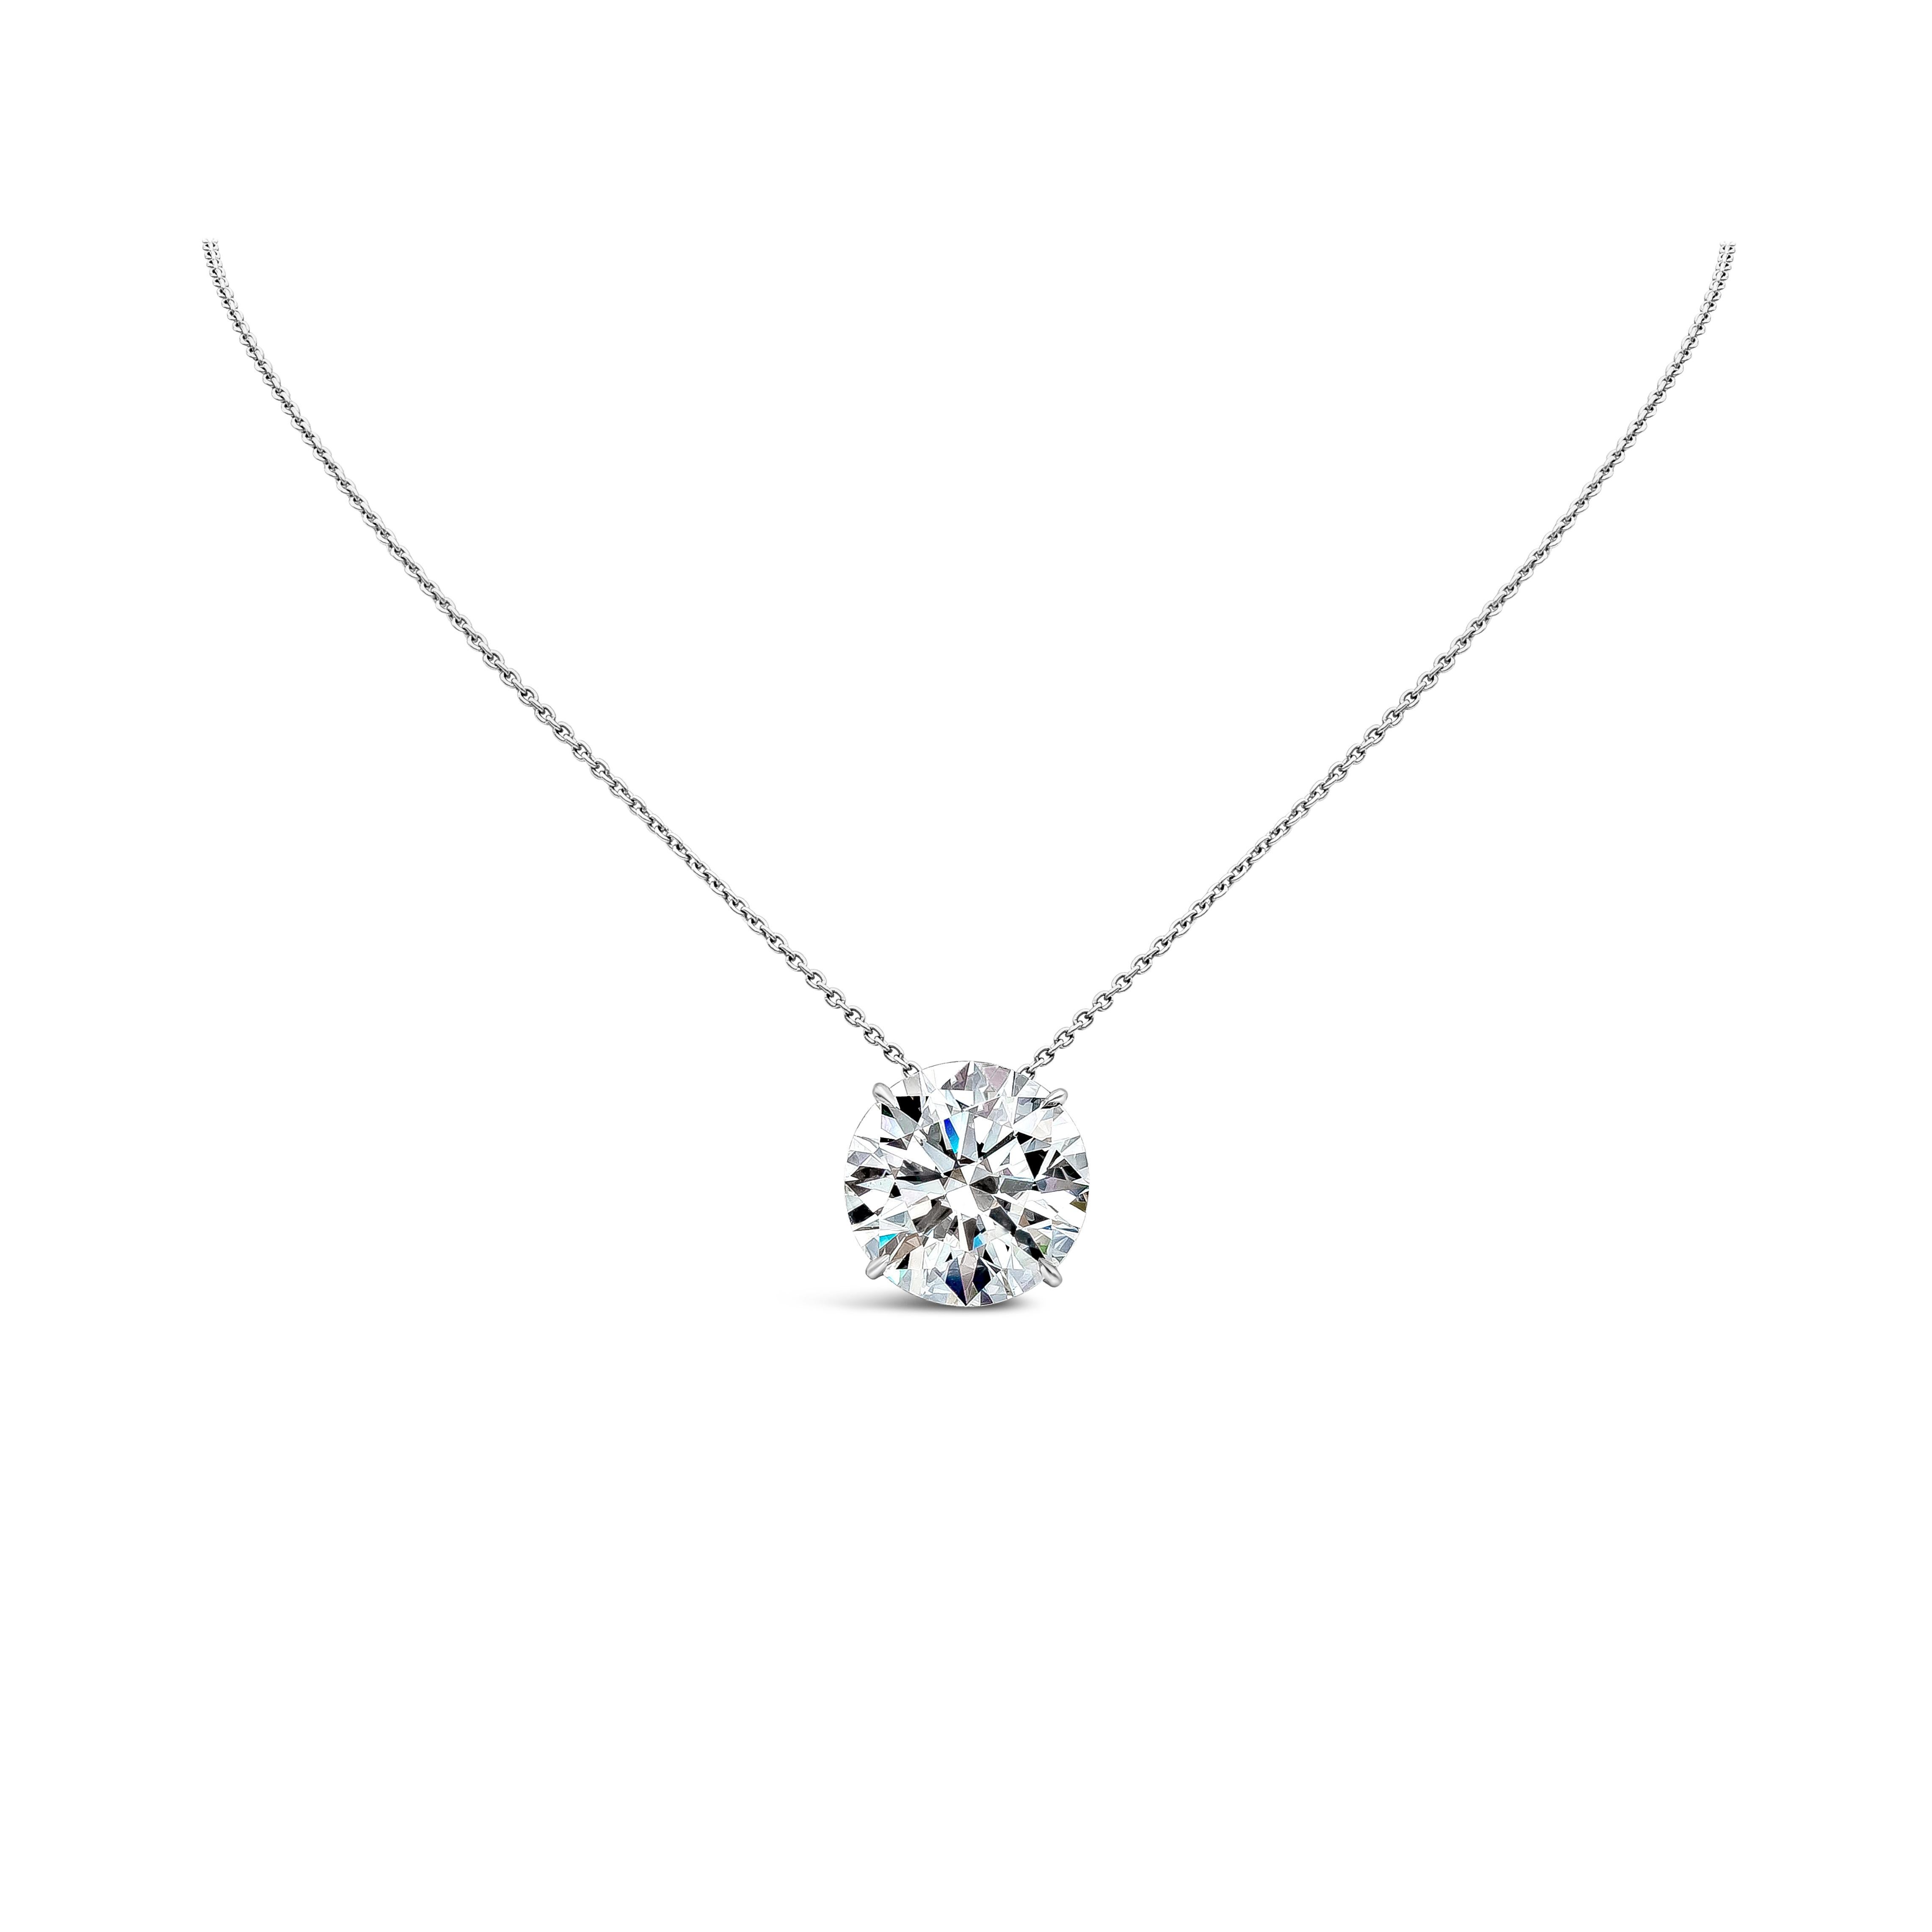 Elegantly made solitaire diamond necklace featuring a HRD certified 10.43 carat brilliant round the diamond, I color, VS2 in clarity. Set in a classic four-prong platinum basket, suspended in an 18 inch platinum chain.